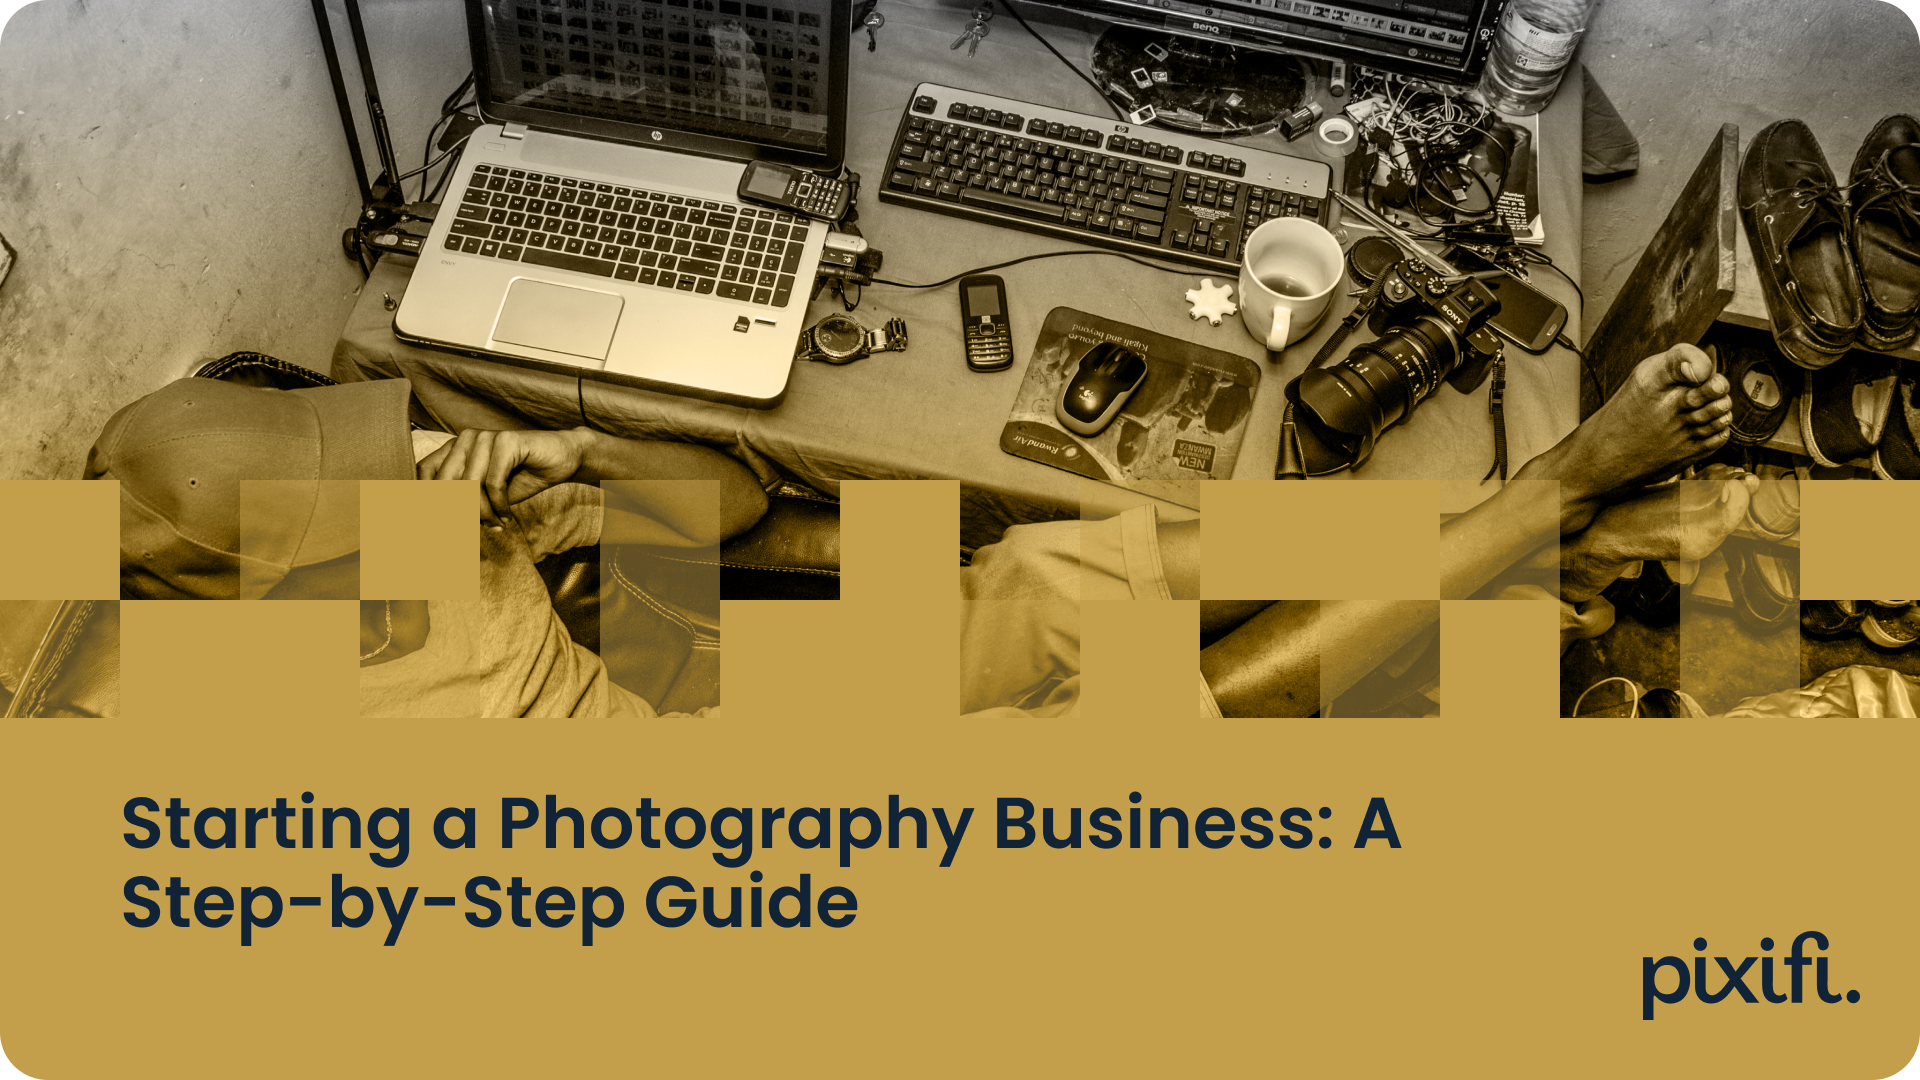 Starting a Photography Business: A Step-by-Step Guide